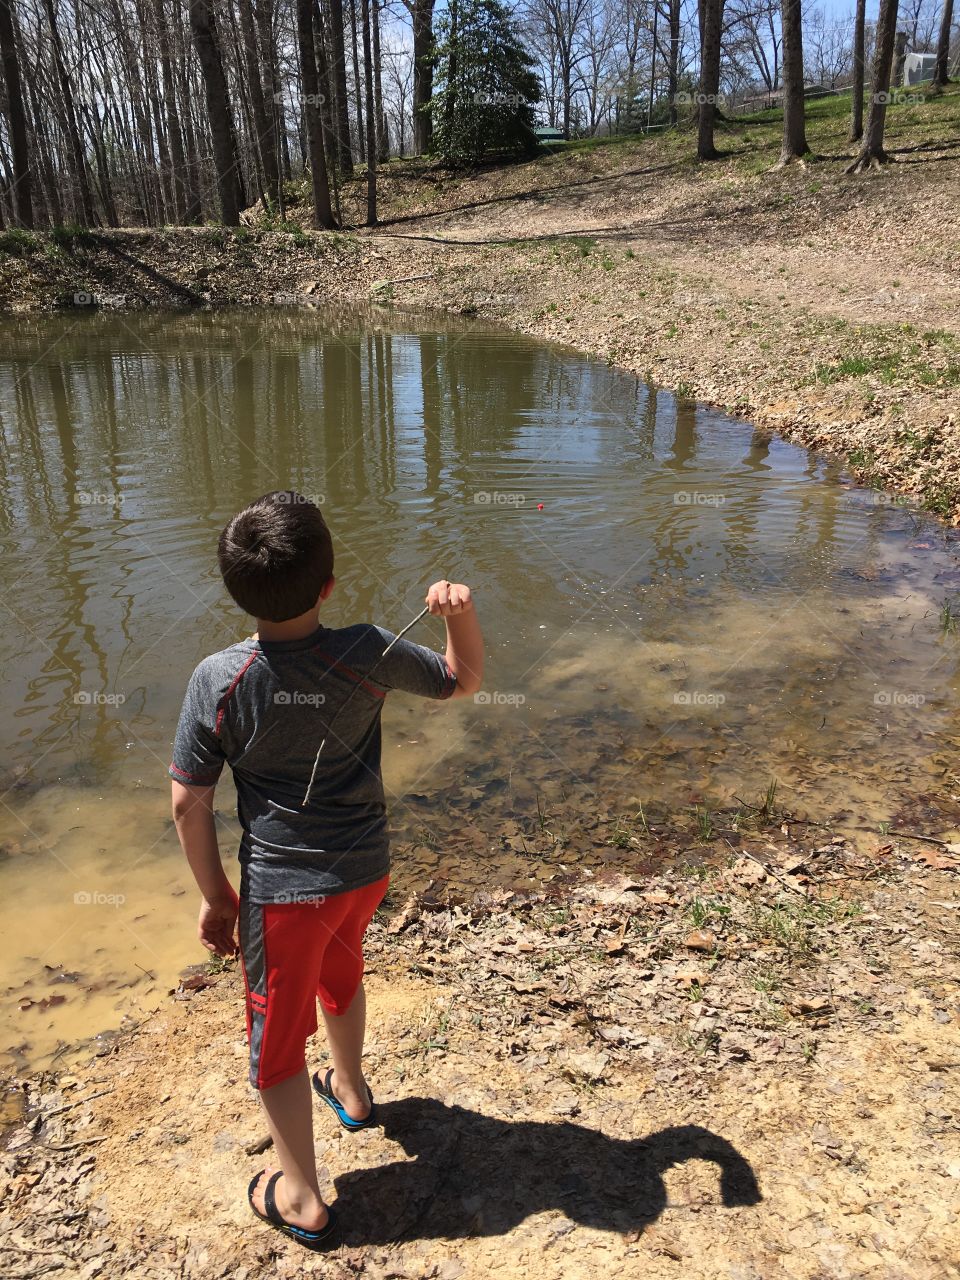 Throwing sticks in a pond 